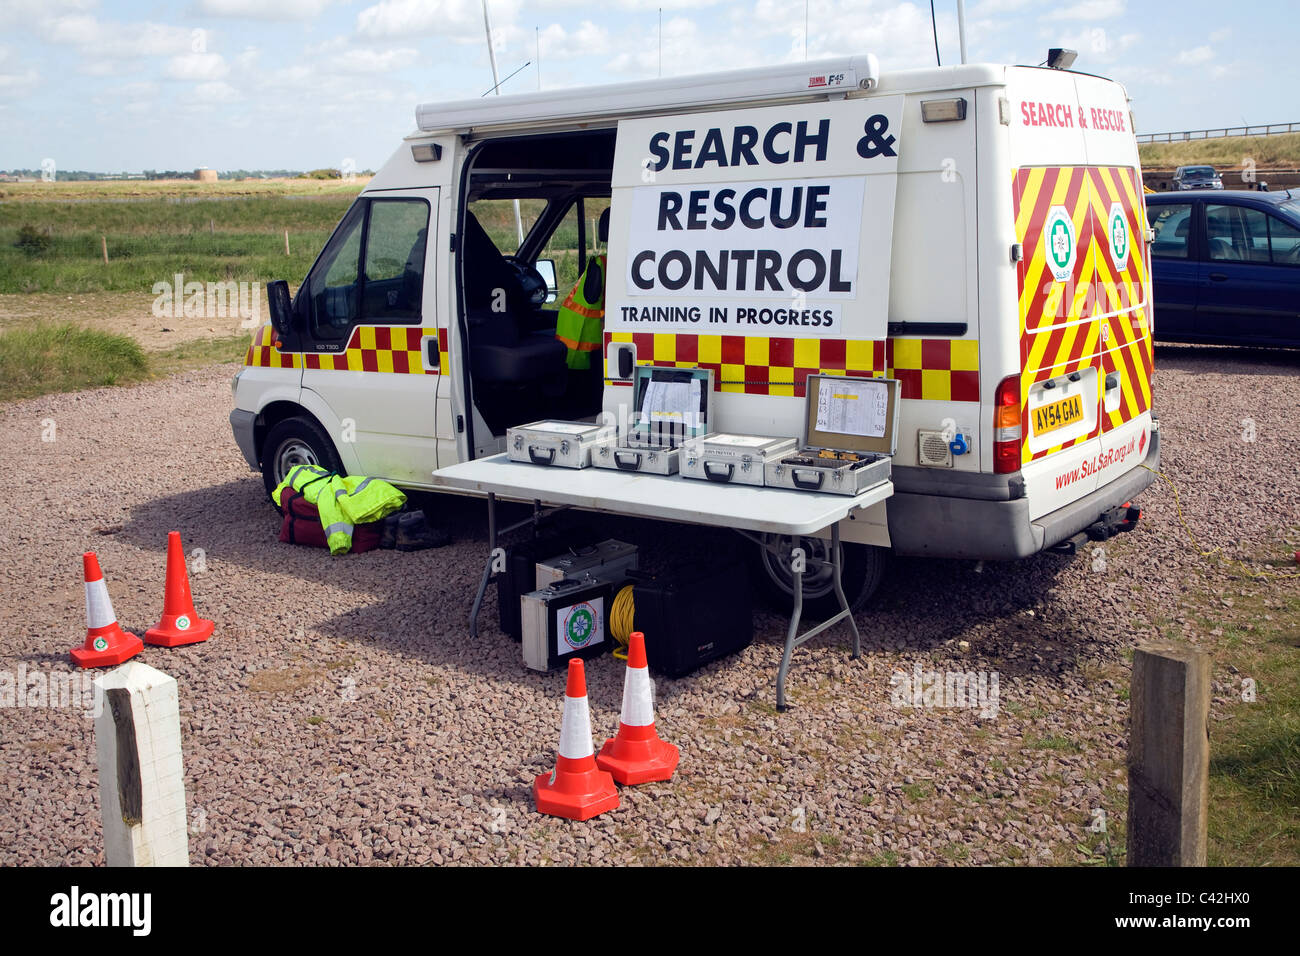 Search and rescue vehicle in training exercise, Bawdsey, Suffolk, England Stock Photo